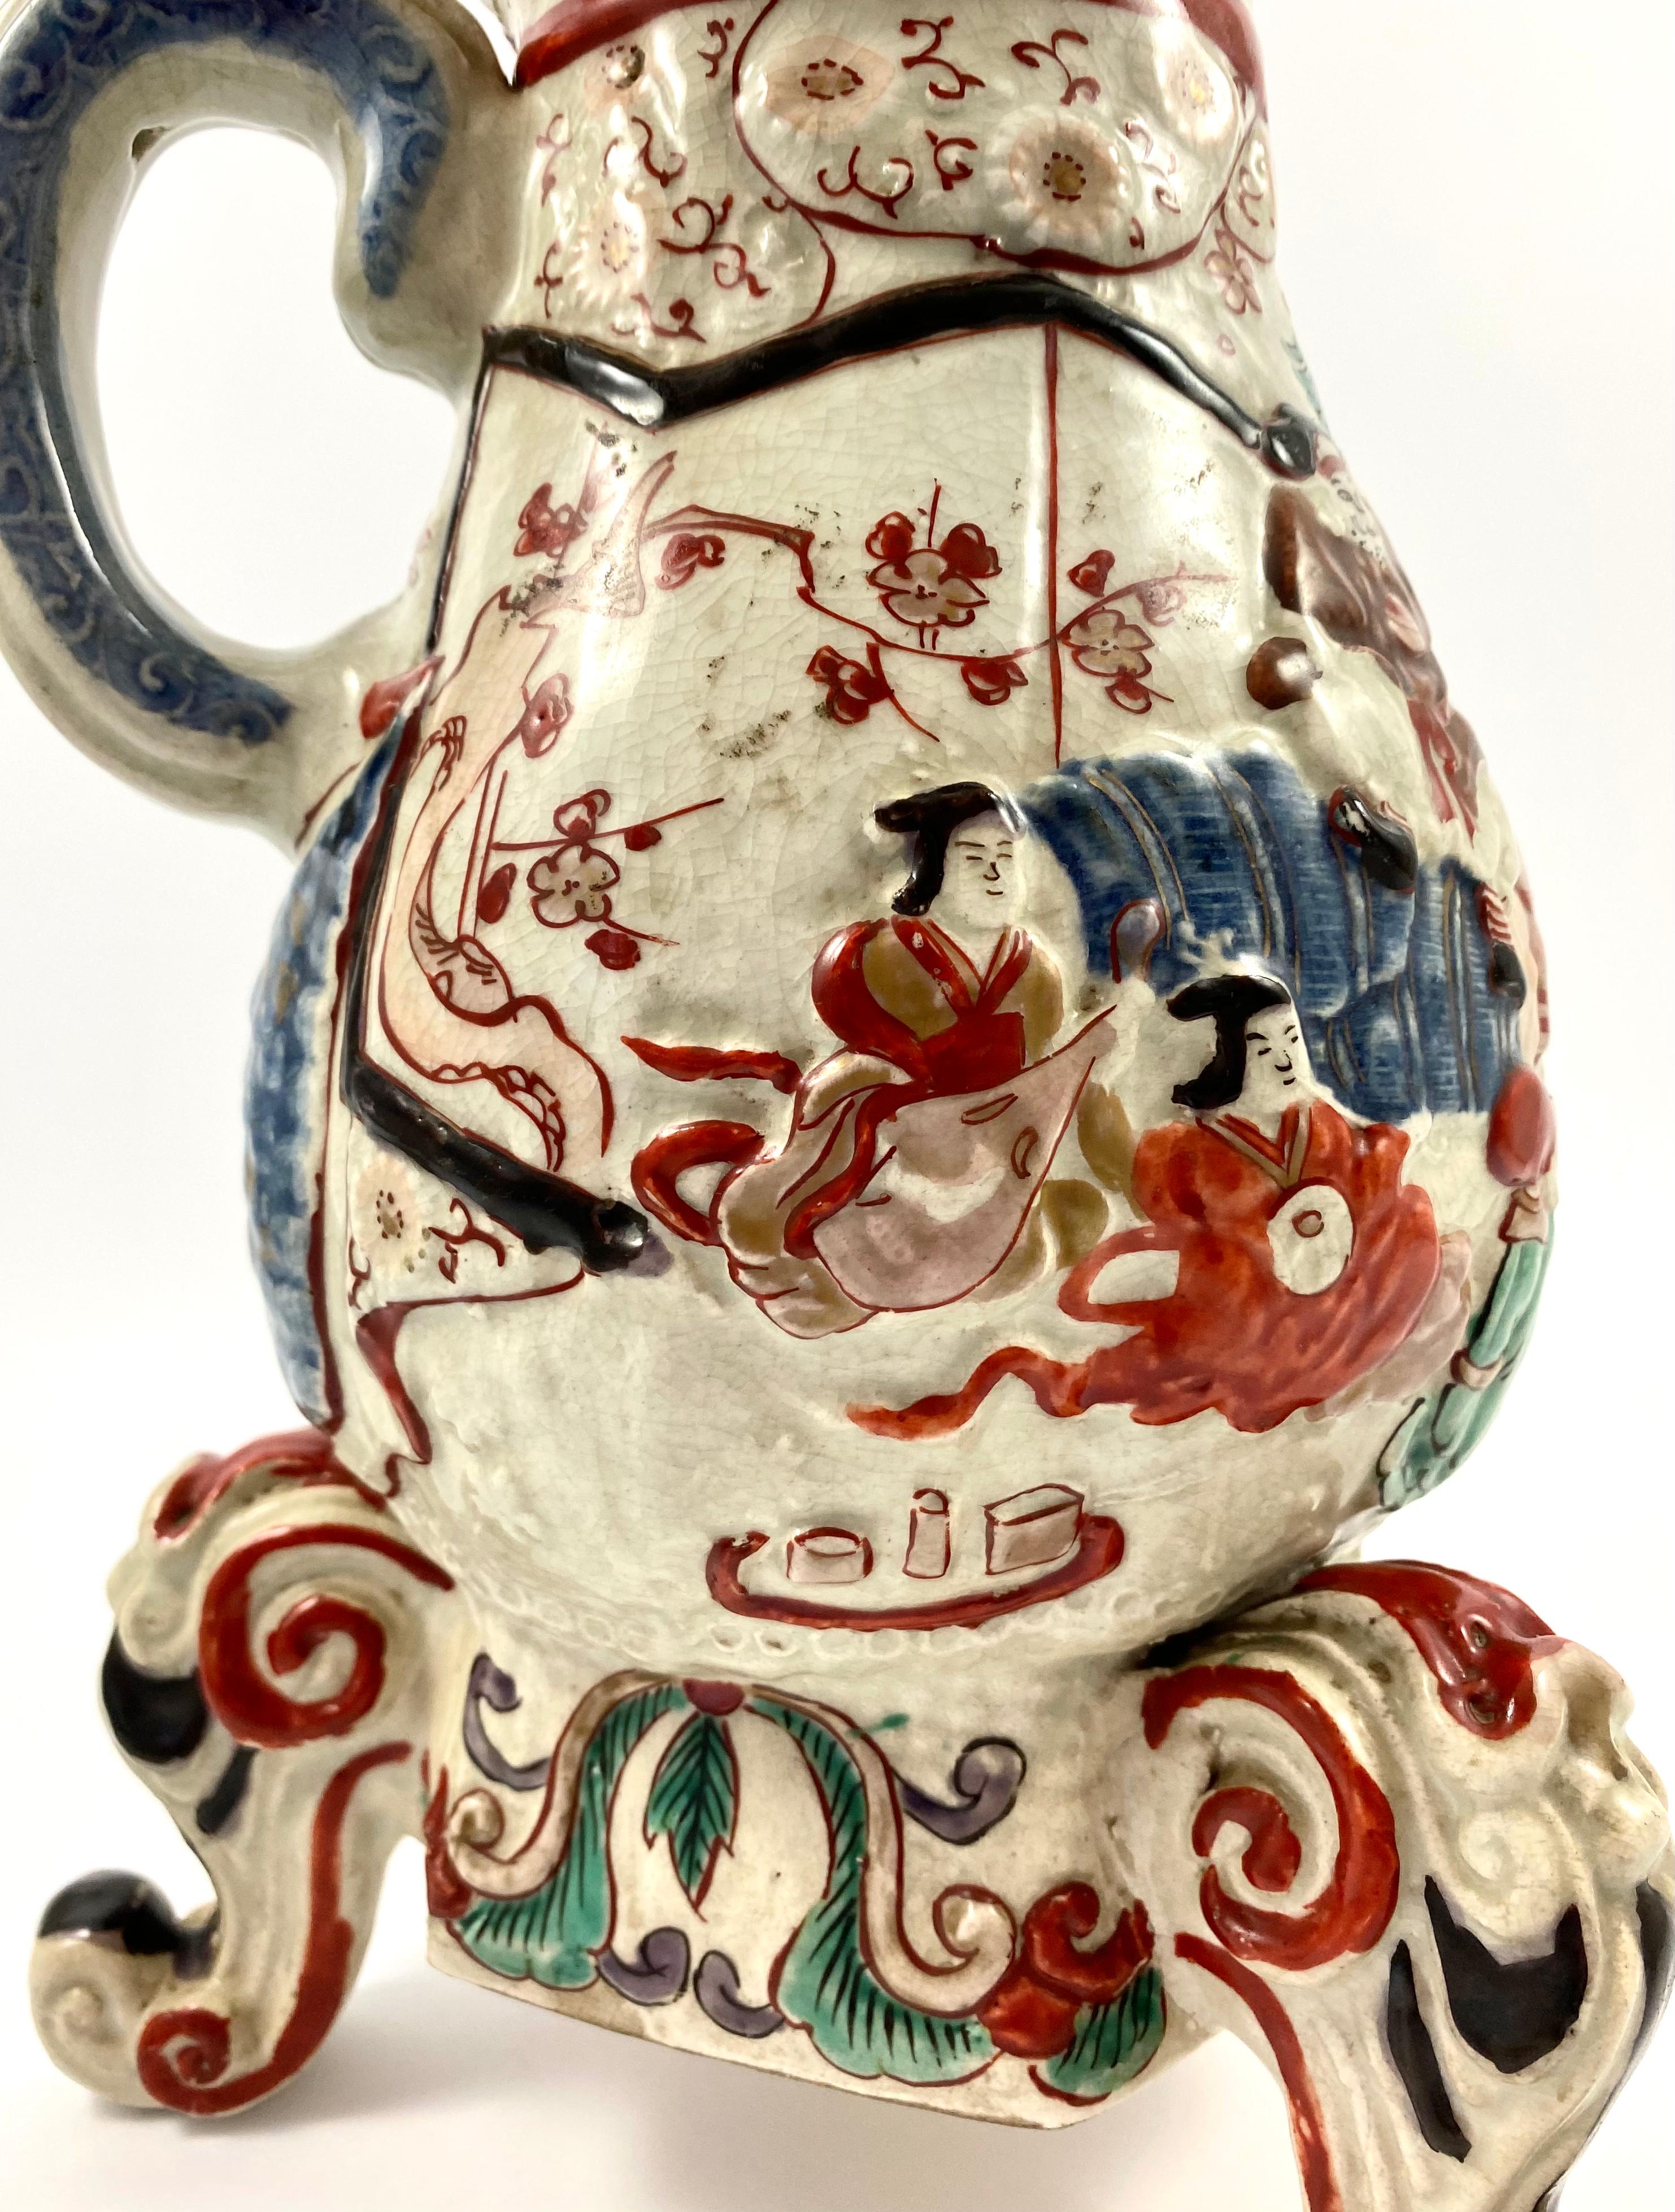 18th Century and Earlier Imari Coffee Pot and Cover, Japan, Late 17th Century, Edo Period